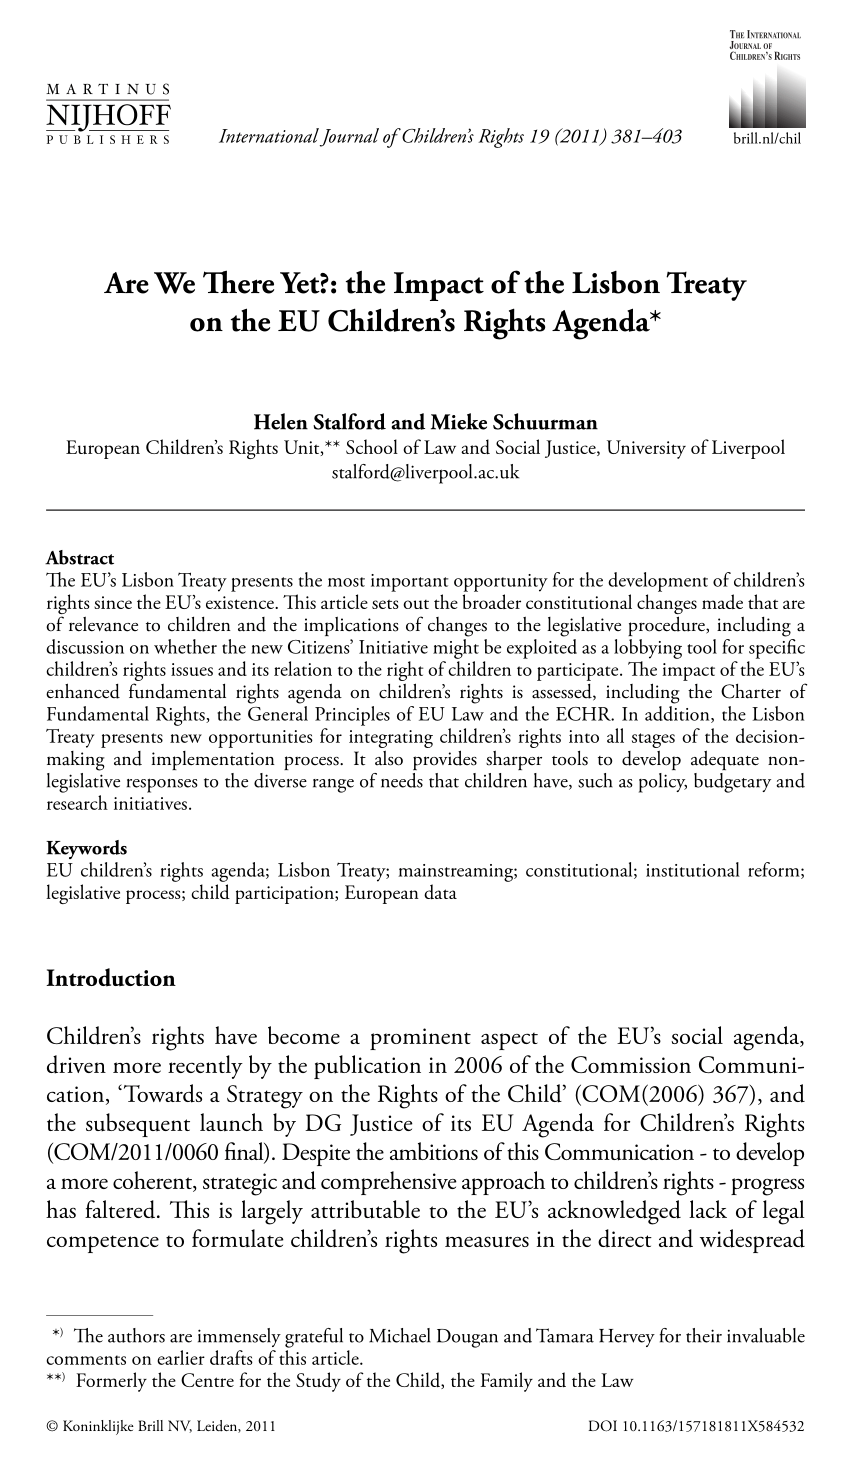 Pdf Are We There Yet The Impact Of The Lisbon Treaty On The Eu Children S Rights Agenda